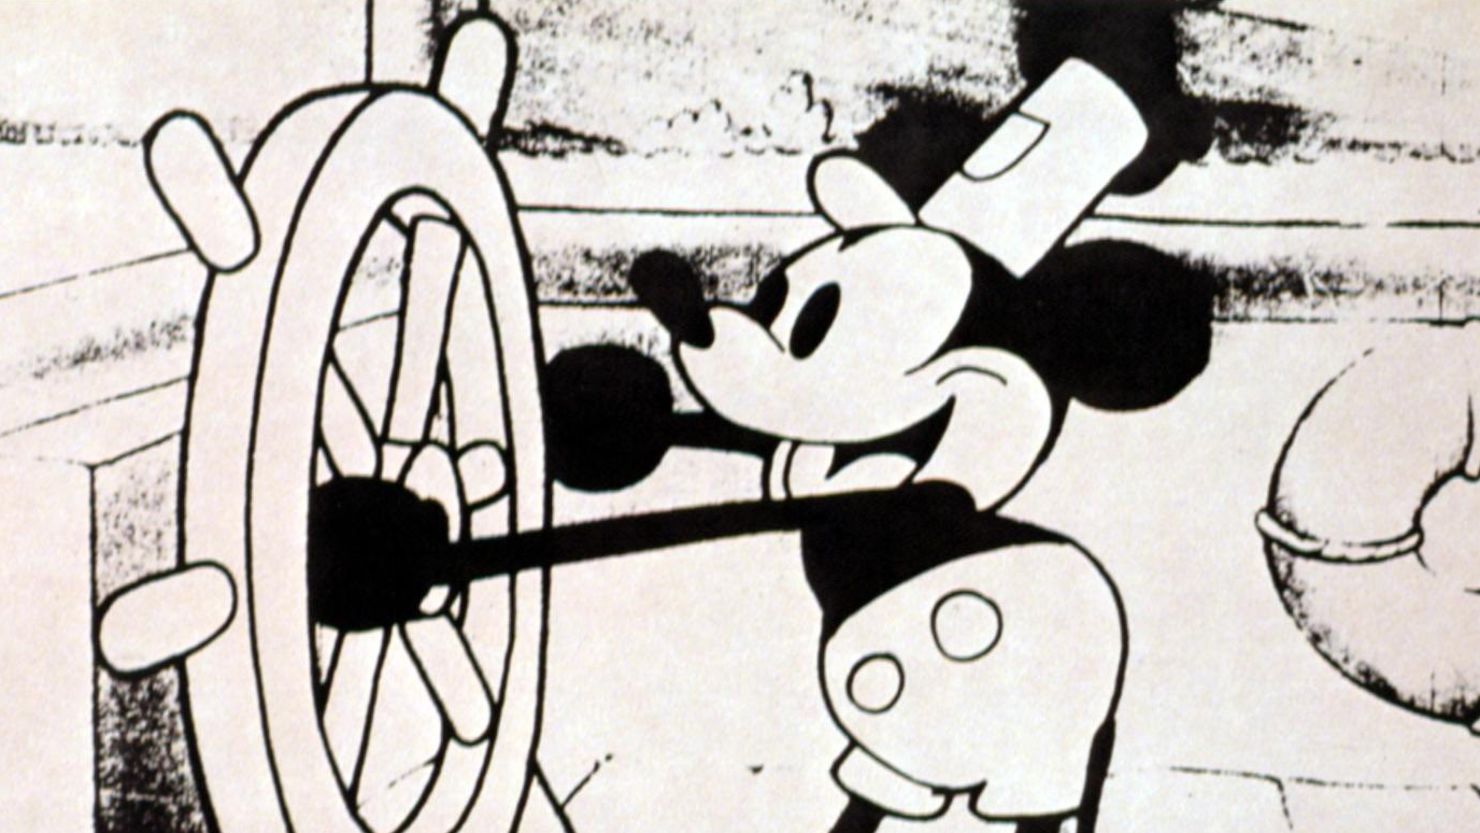 Steamboat Willie, lobbycard, Mickey Mouse, 1928.